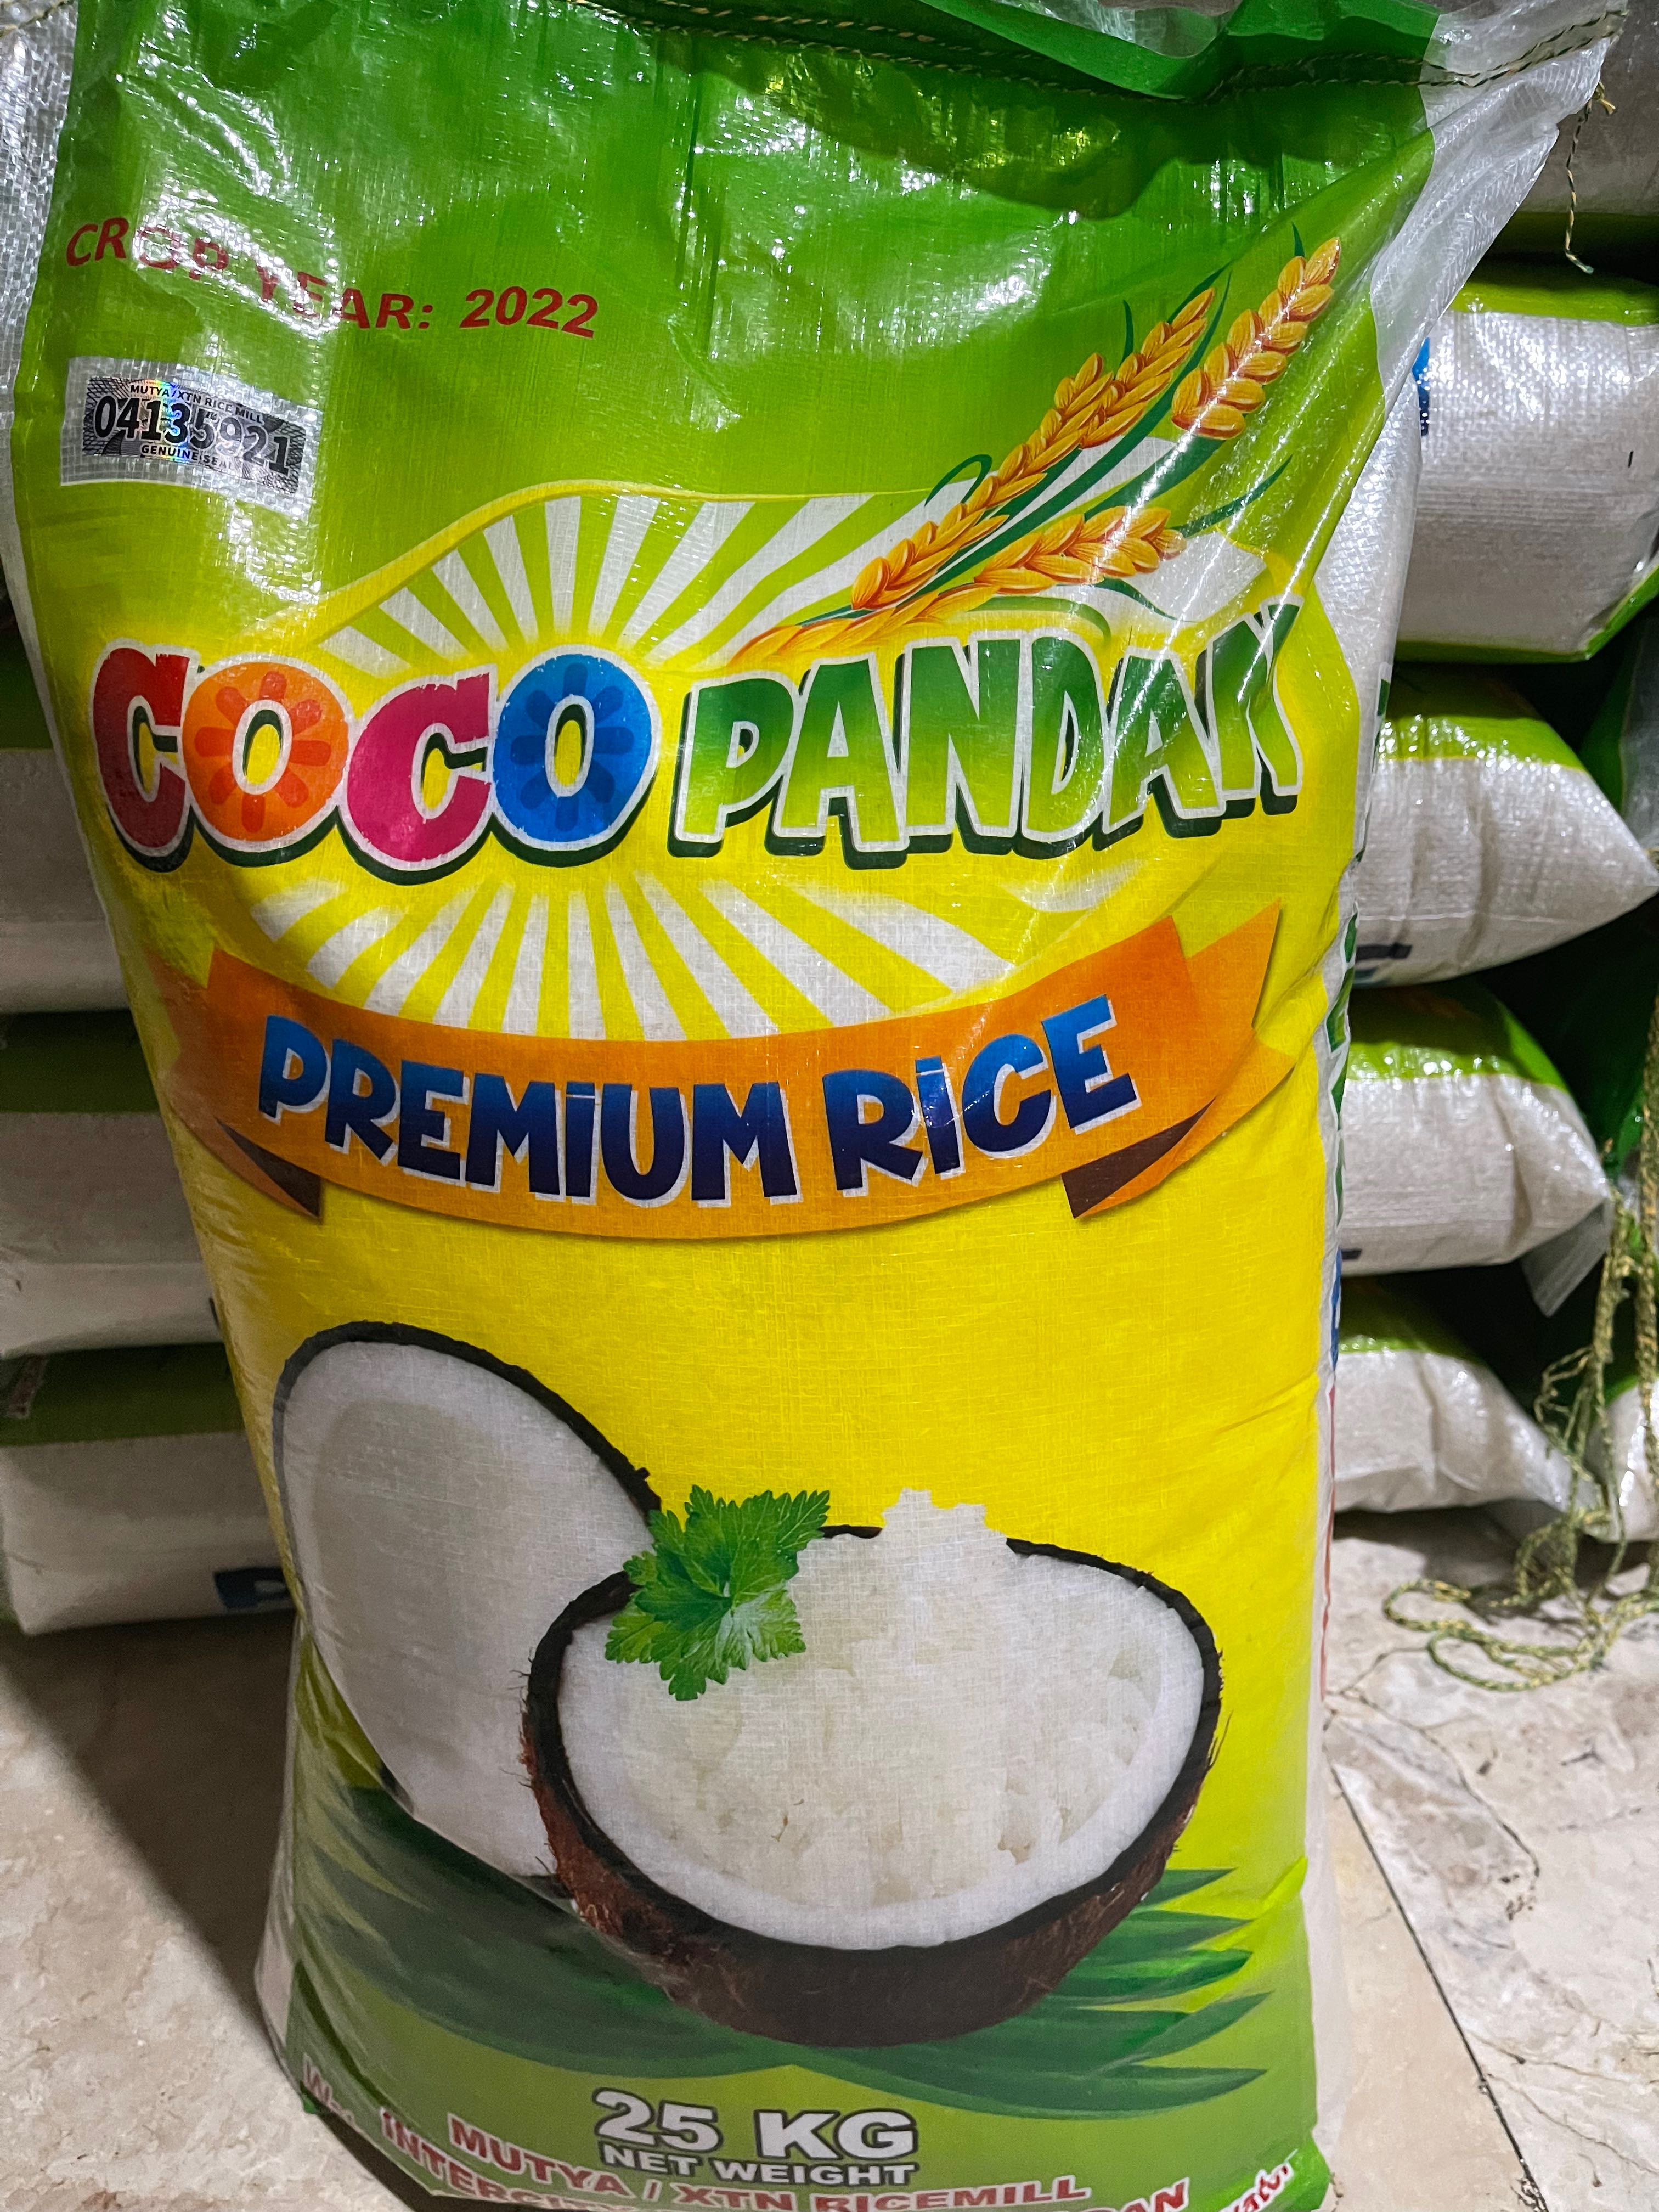 Coco pandan, Food & Drinks, Rice & Noodles on Carousell